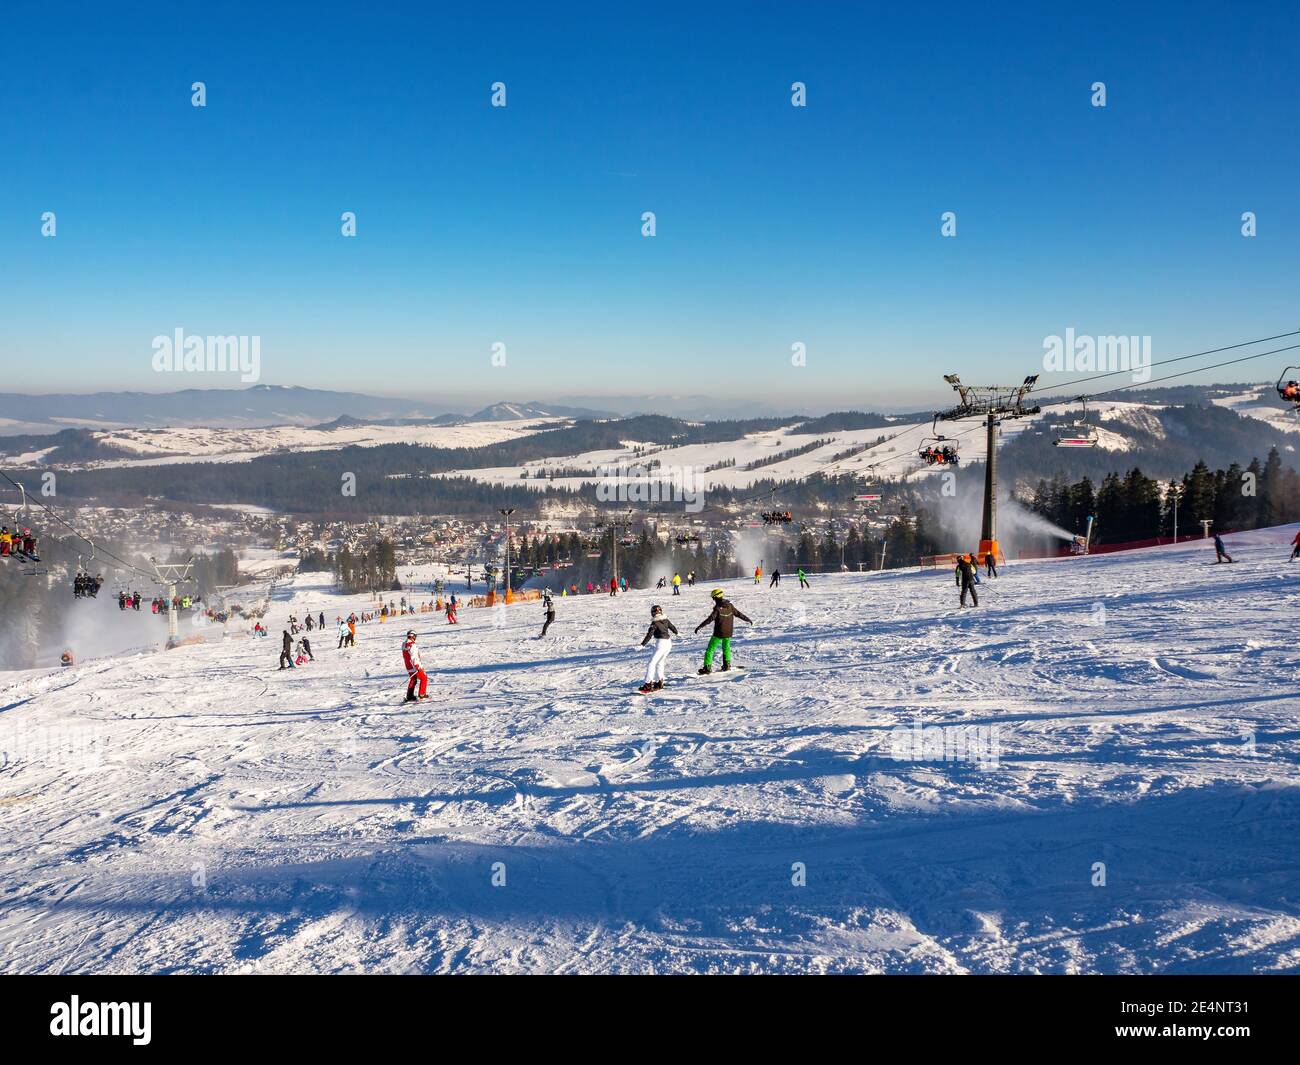 Ski slopes, chairlifts, skiers and snowboarders in Bialka Tatrzanska ski resort in Poland in winter. Snow cannons in action Stock Photo